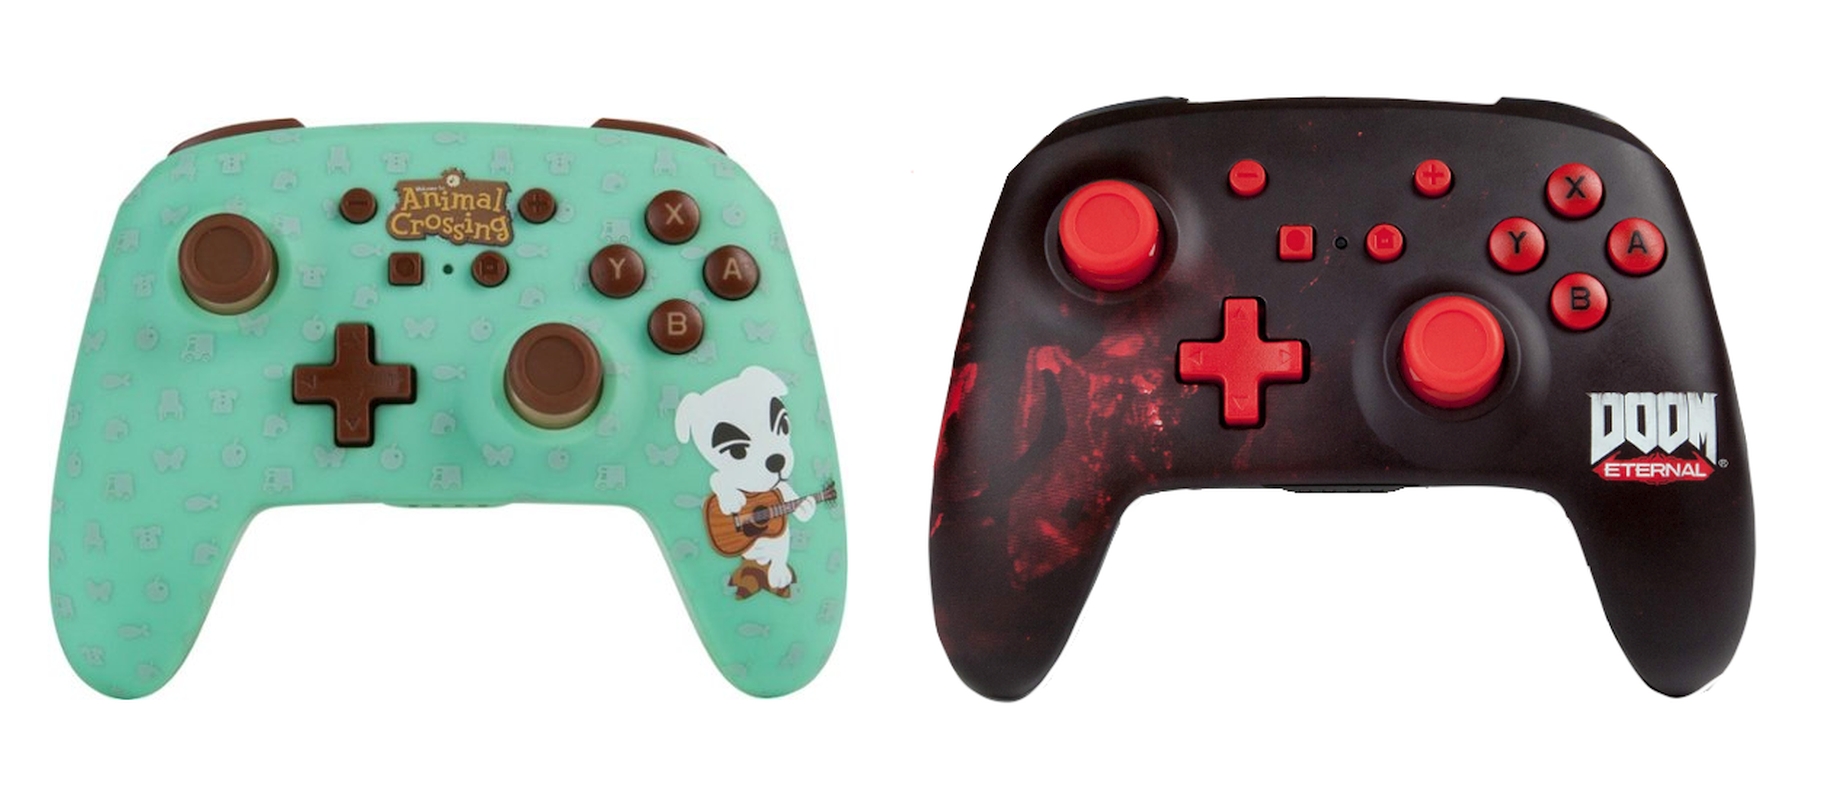 Animal Crossing: New Horizons And Doom Eternal PowerA Enhanced Switch Controllers Announced